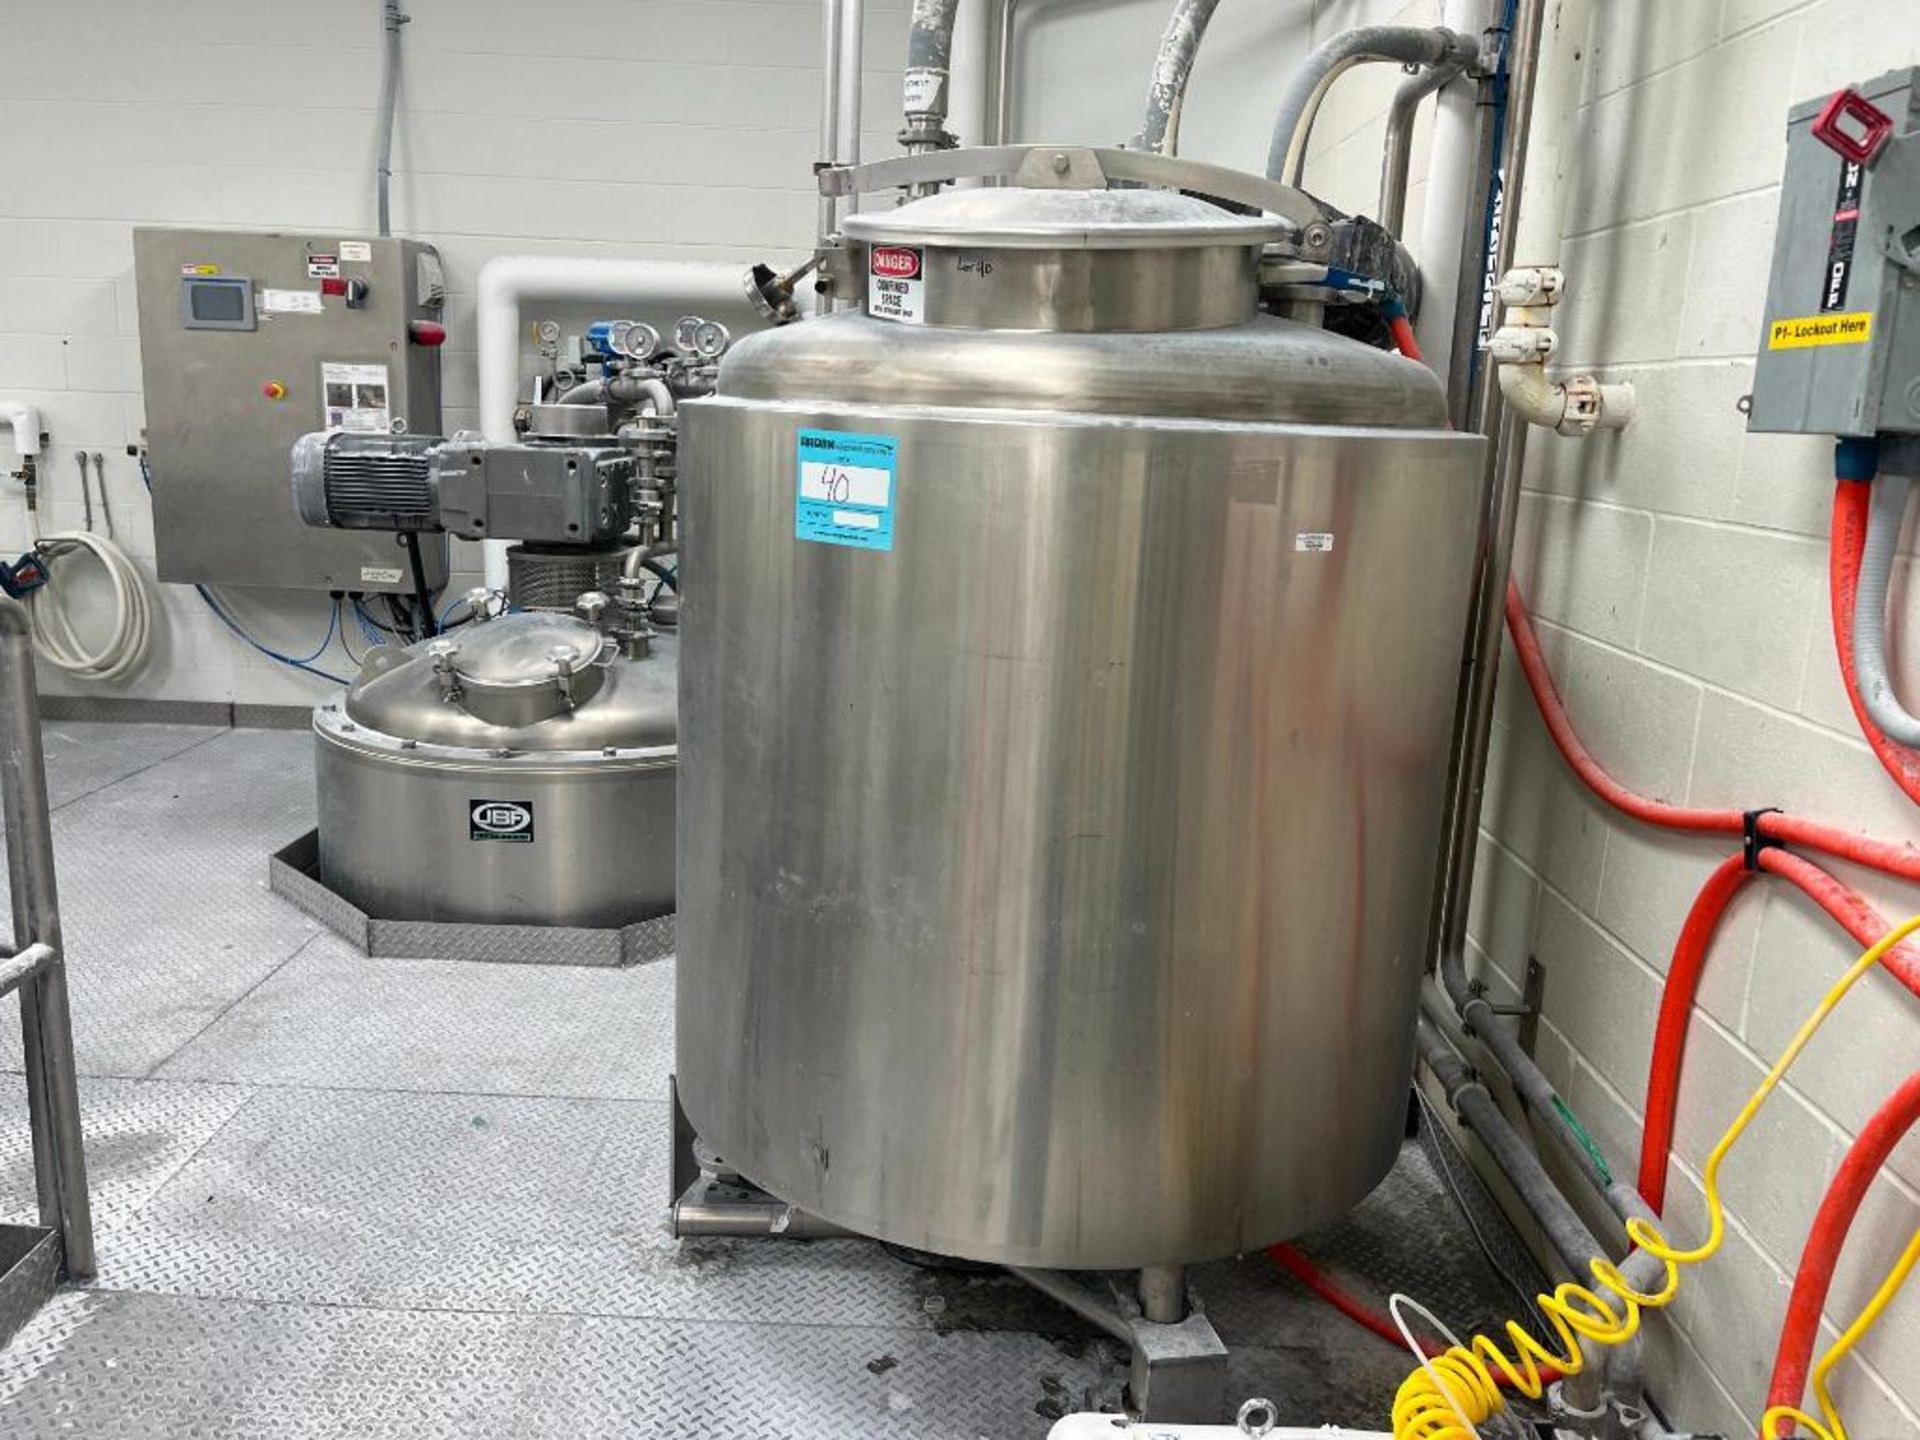 Stainless Steel Tank Aproximate 200 Gallon with Dish Top Cone Bottom. Includes Top Agitator and Cont - Image 4 of 20